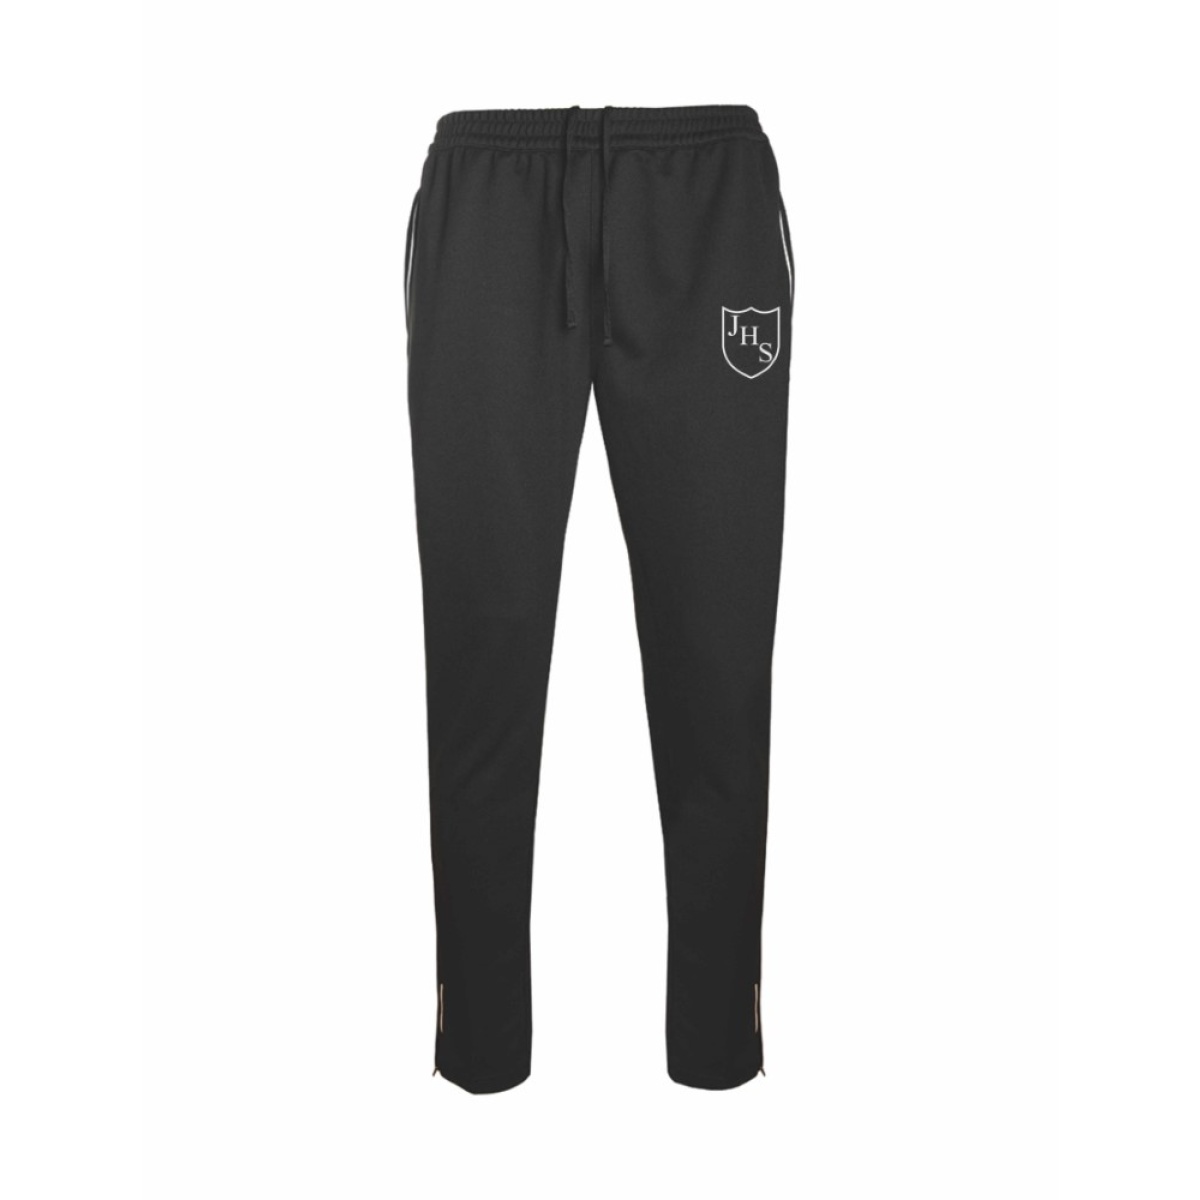 James Hornsby School - PE Training Pant, James Hornsby School